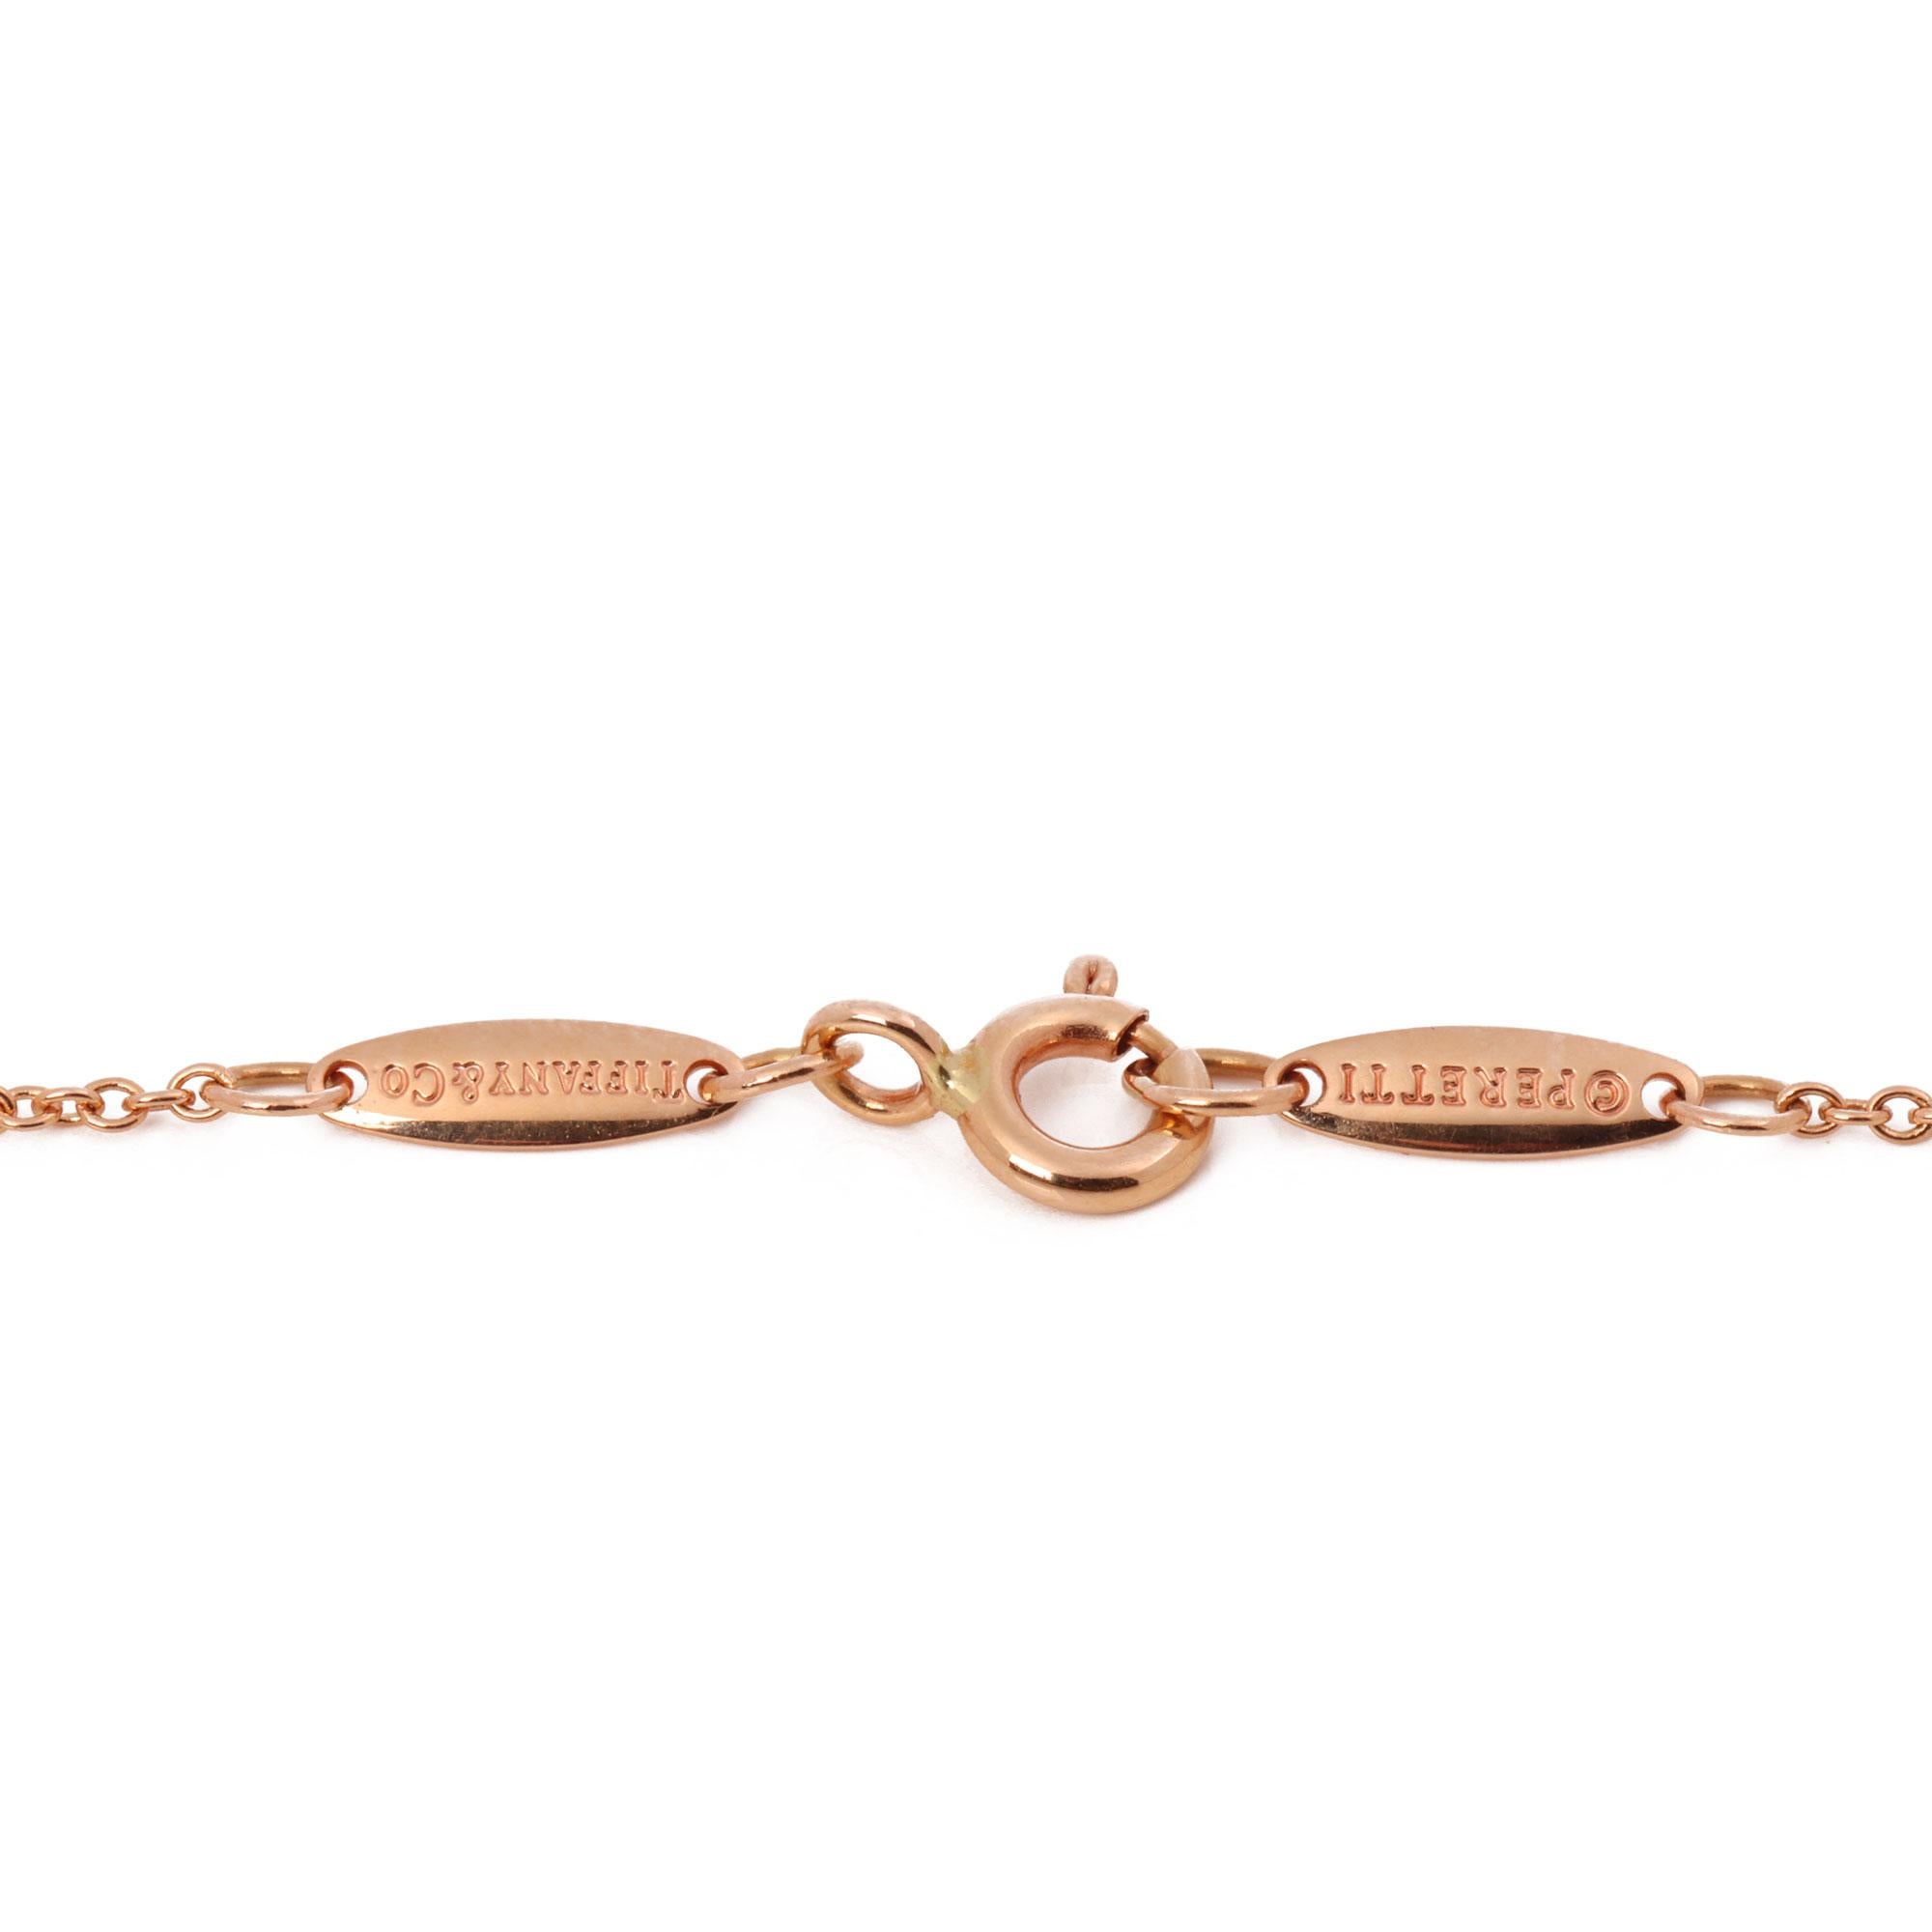 This necklace by Tiffany & Co. features an open heart pendant in 18ct Rose Gold on a 41cm chain. Accompanied with a Xupes Presentation box. Our Xupes reference is J781 should you need to quote this. 